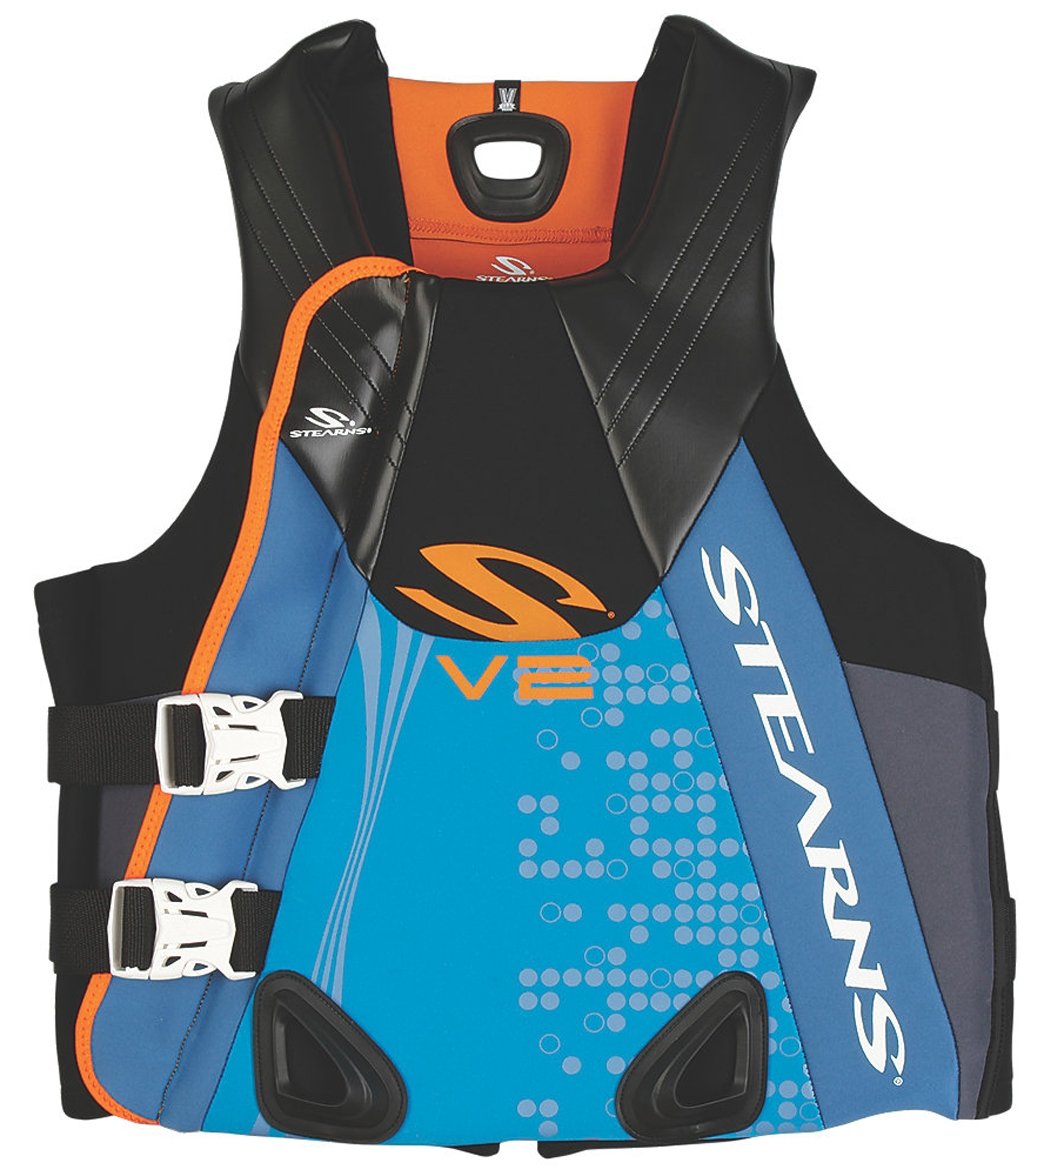 Stearns Men S V2 Uscg Life Jacket At Swimoutlet Com Free Shipping